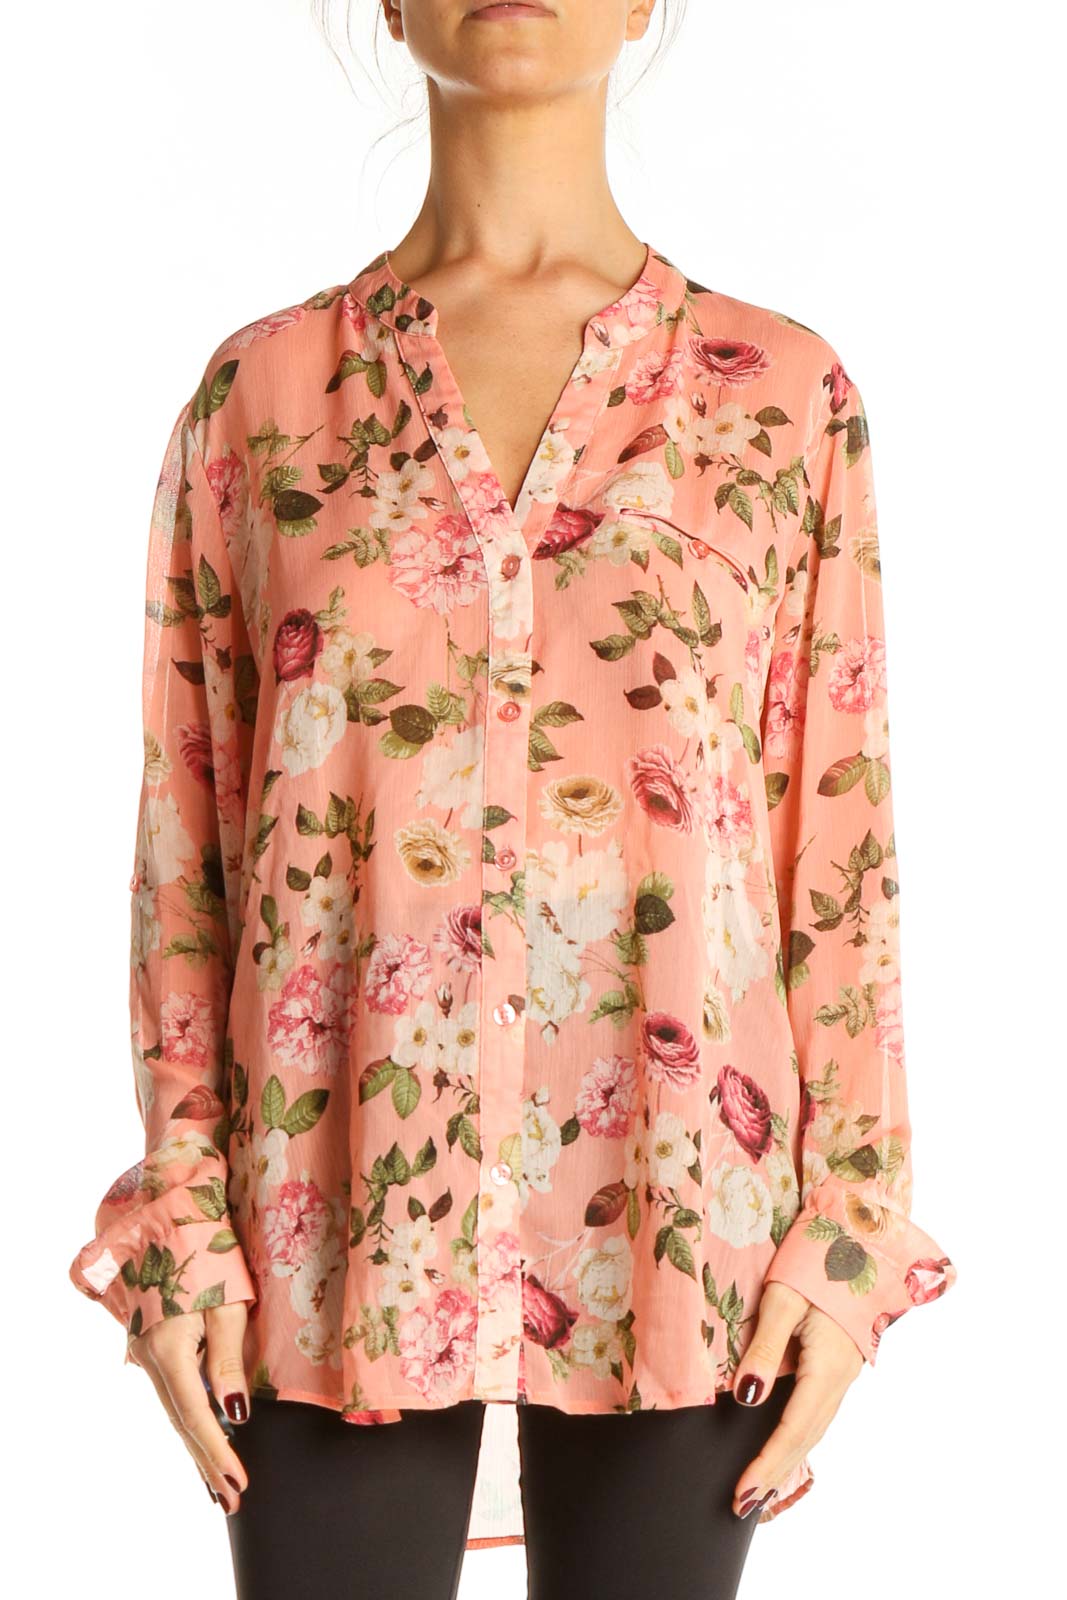 Pink Floral Print All Day Wear Top Front